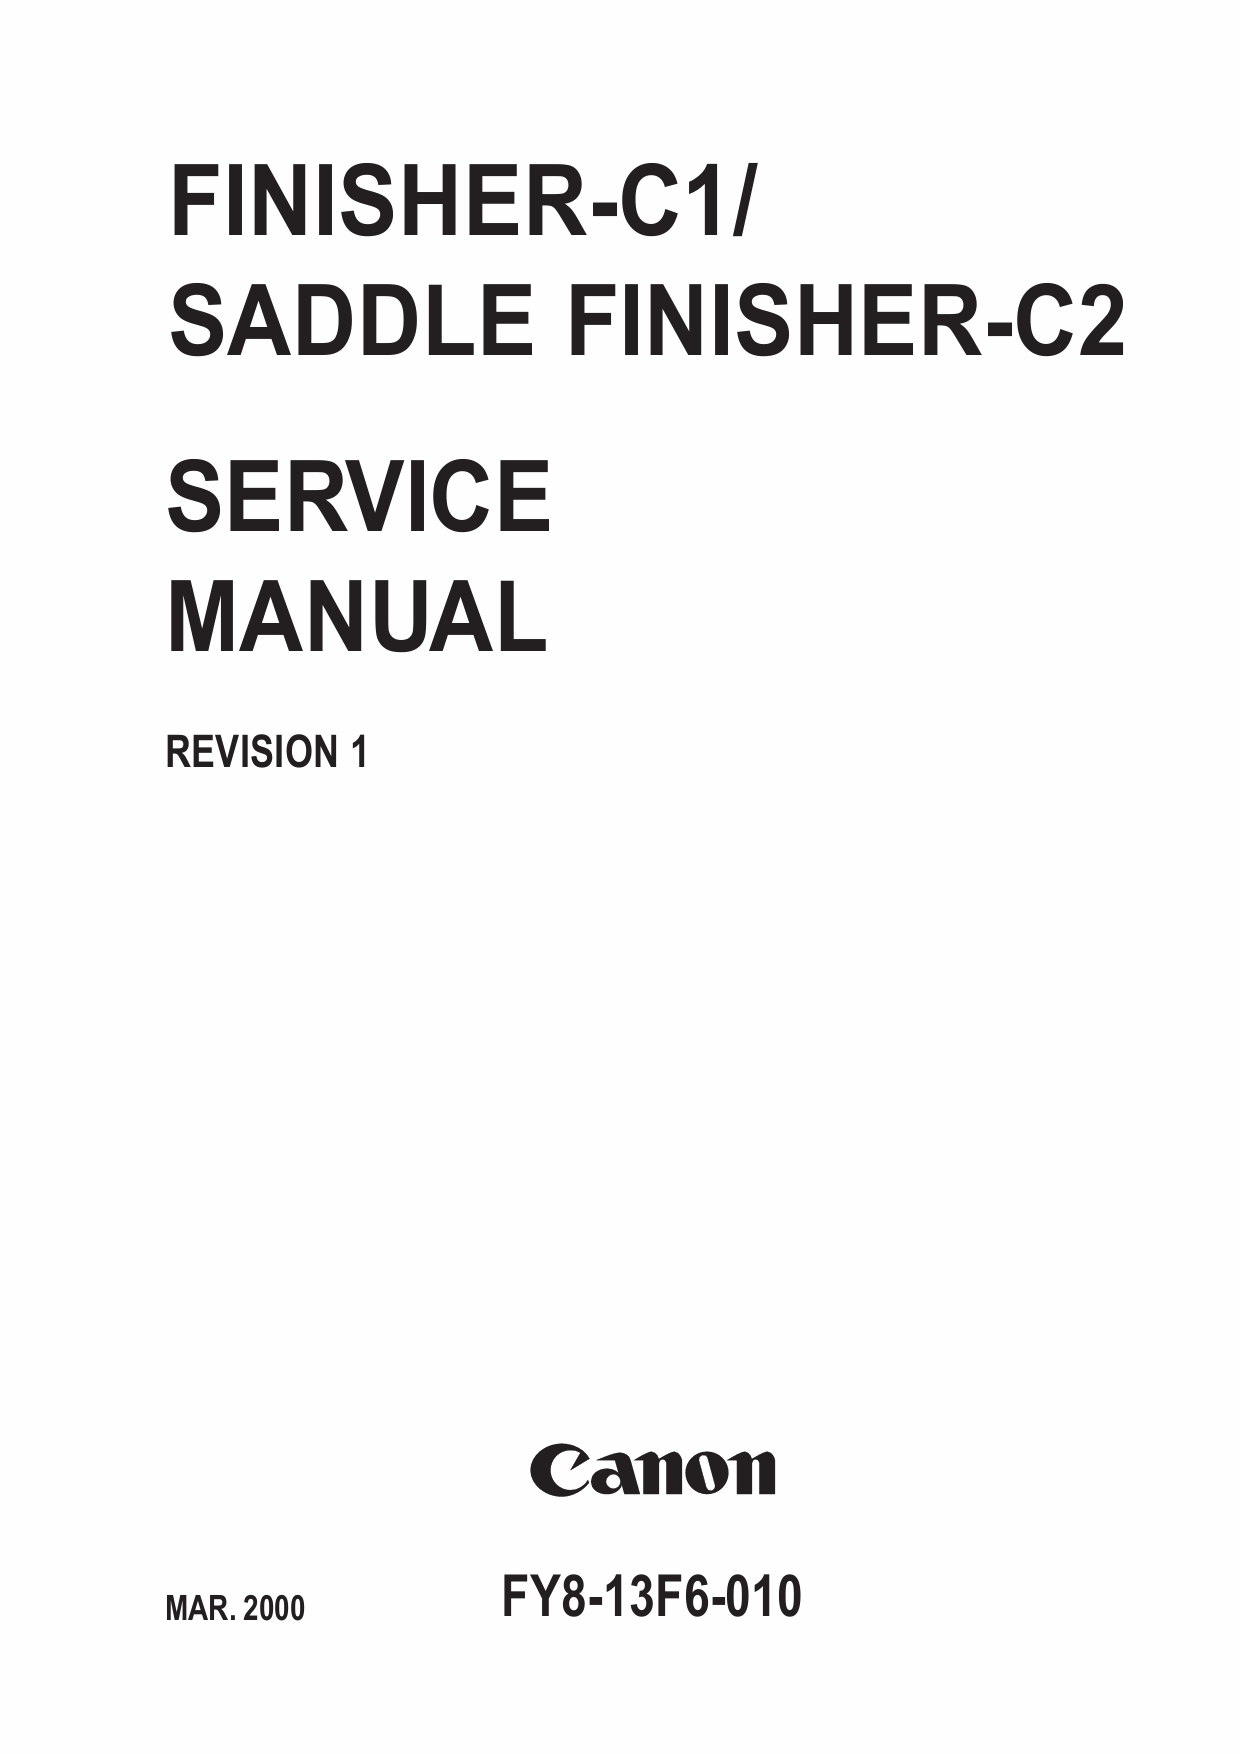 Canon Options Finisher-C1 C2 Parts and Service Manual-1